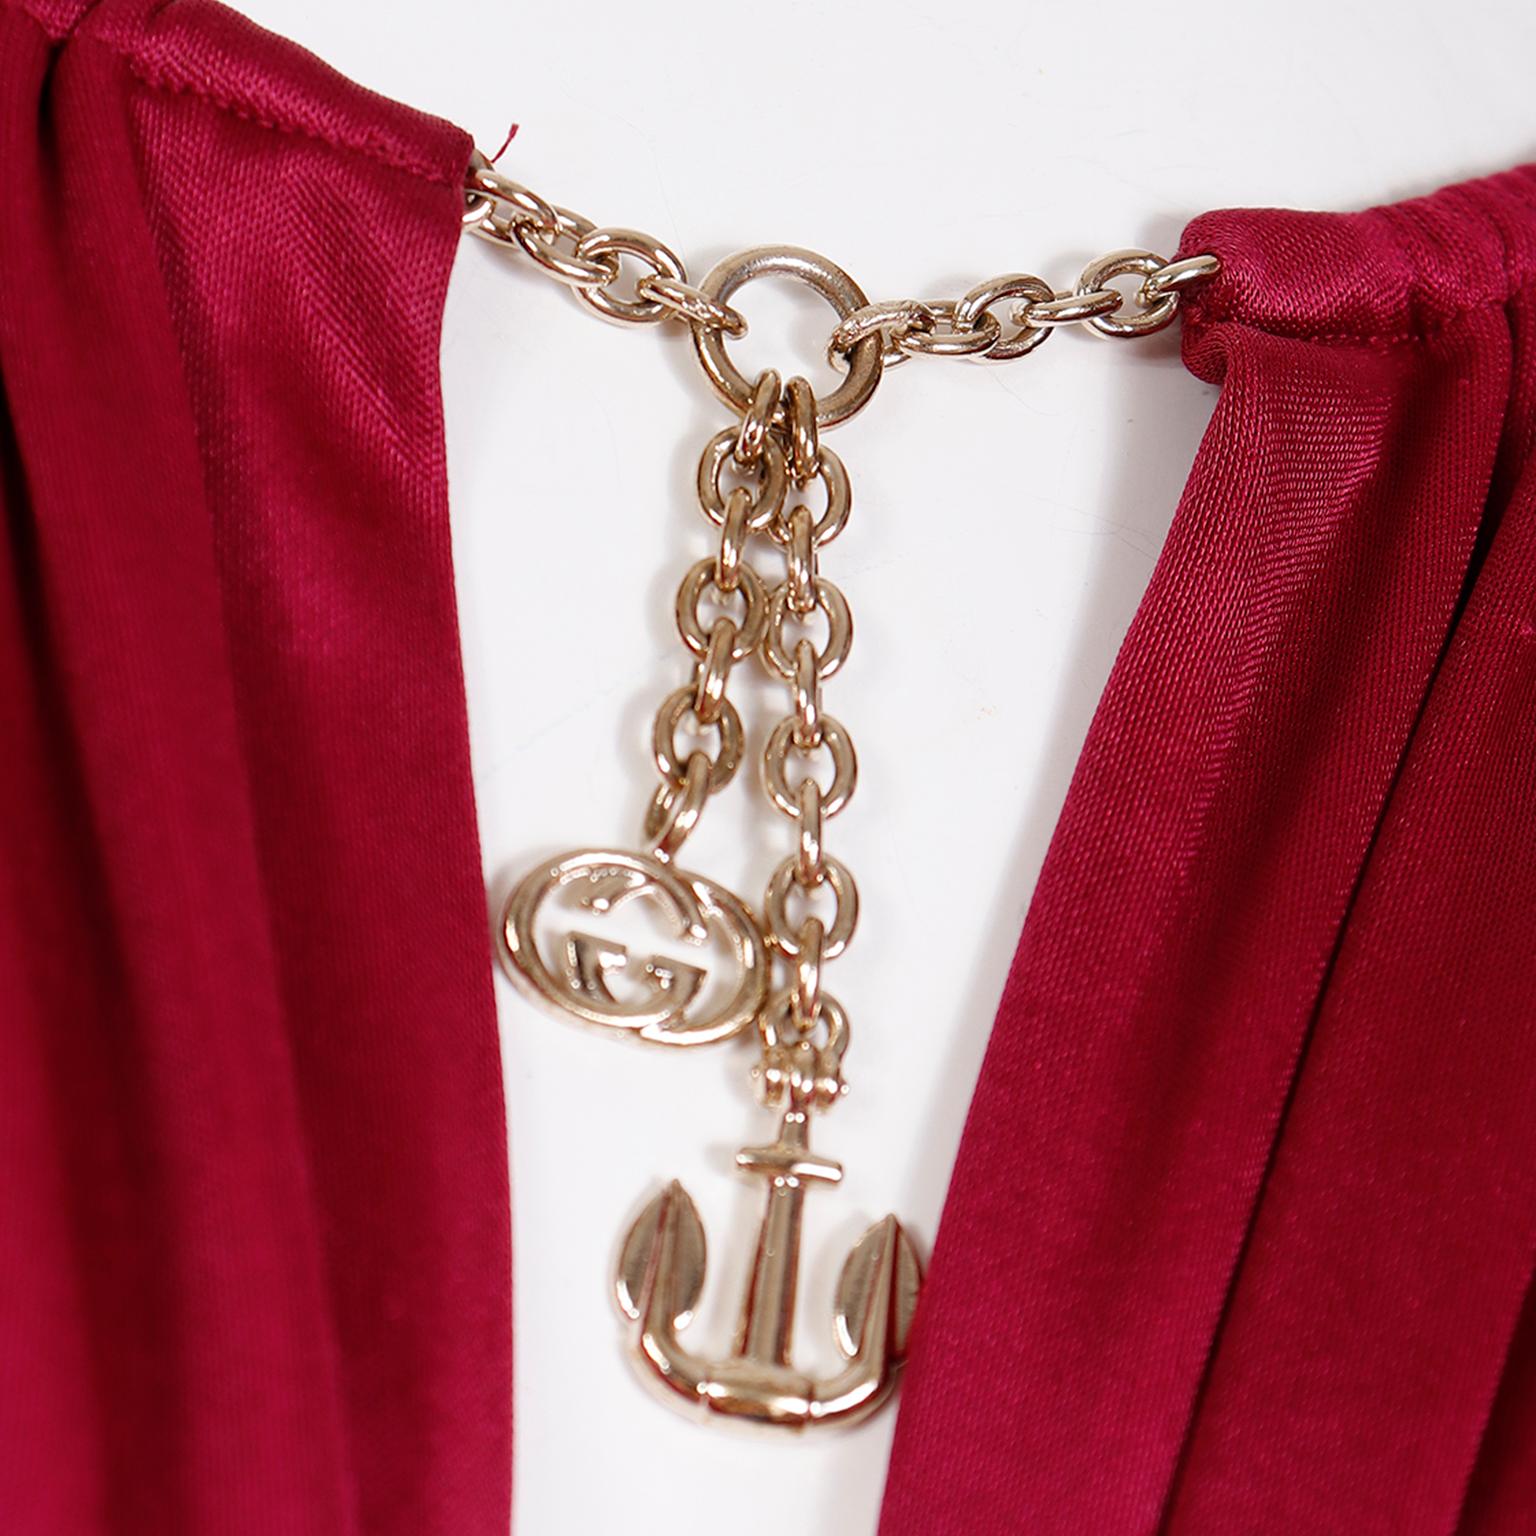 Gucci Burgundy Low Cut Top with Sash and Gold GG Logo & Anchor Charms 6